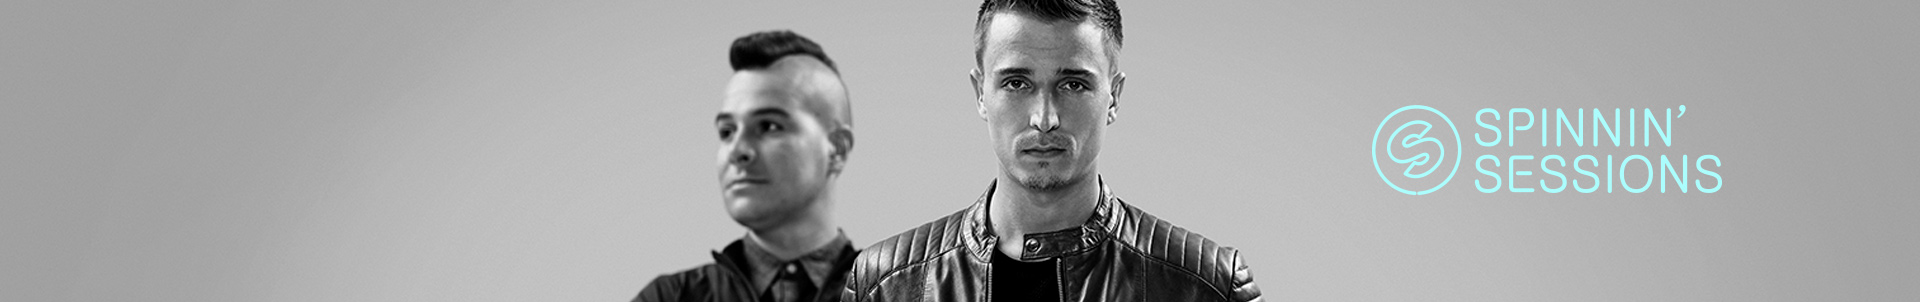 We Rave You premiere: Spinnin' Sessions with a Guest Mix by Blasterjaxx